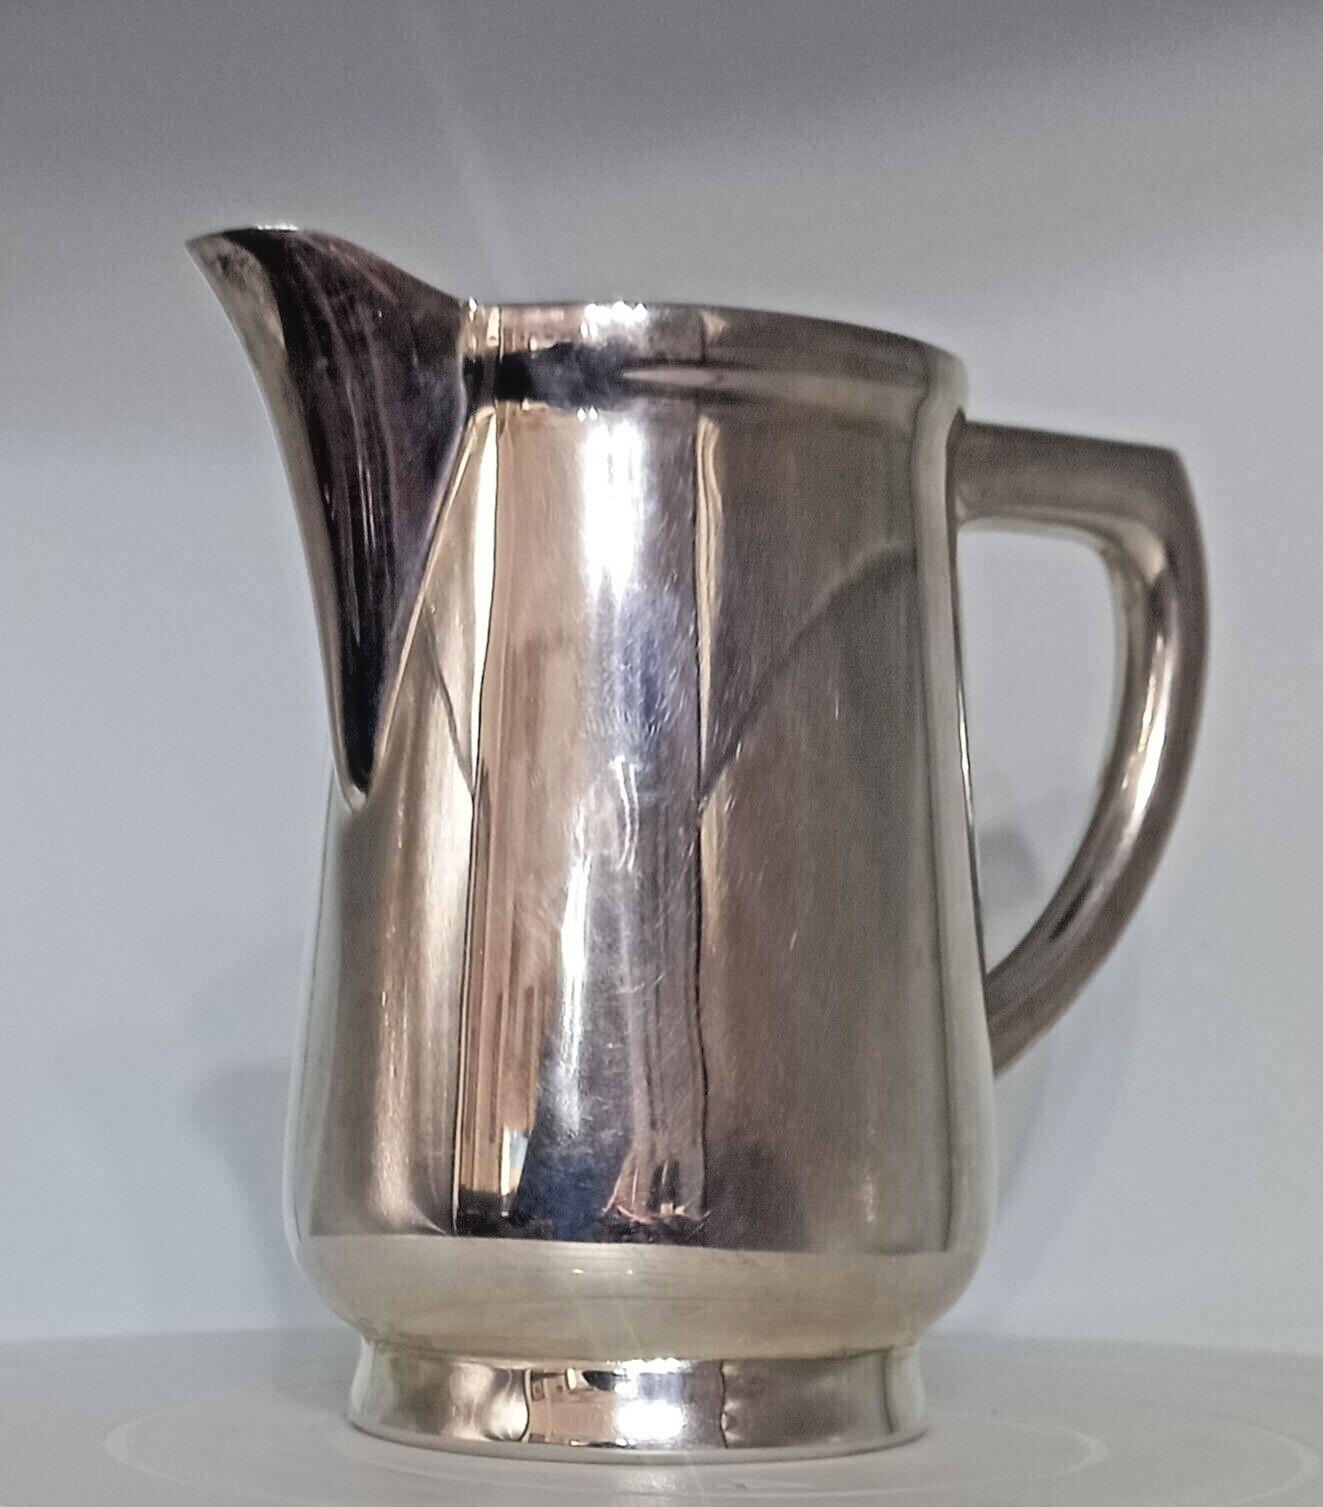 VINTAGE WMF M/S ALSTERUFER SILVER PLATED JUG PITCHER c1939 - WWII OSLO 1943- v/g